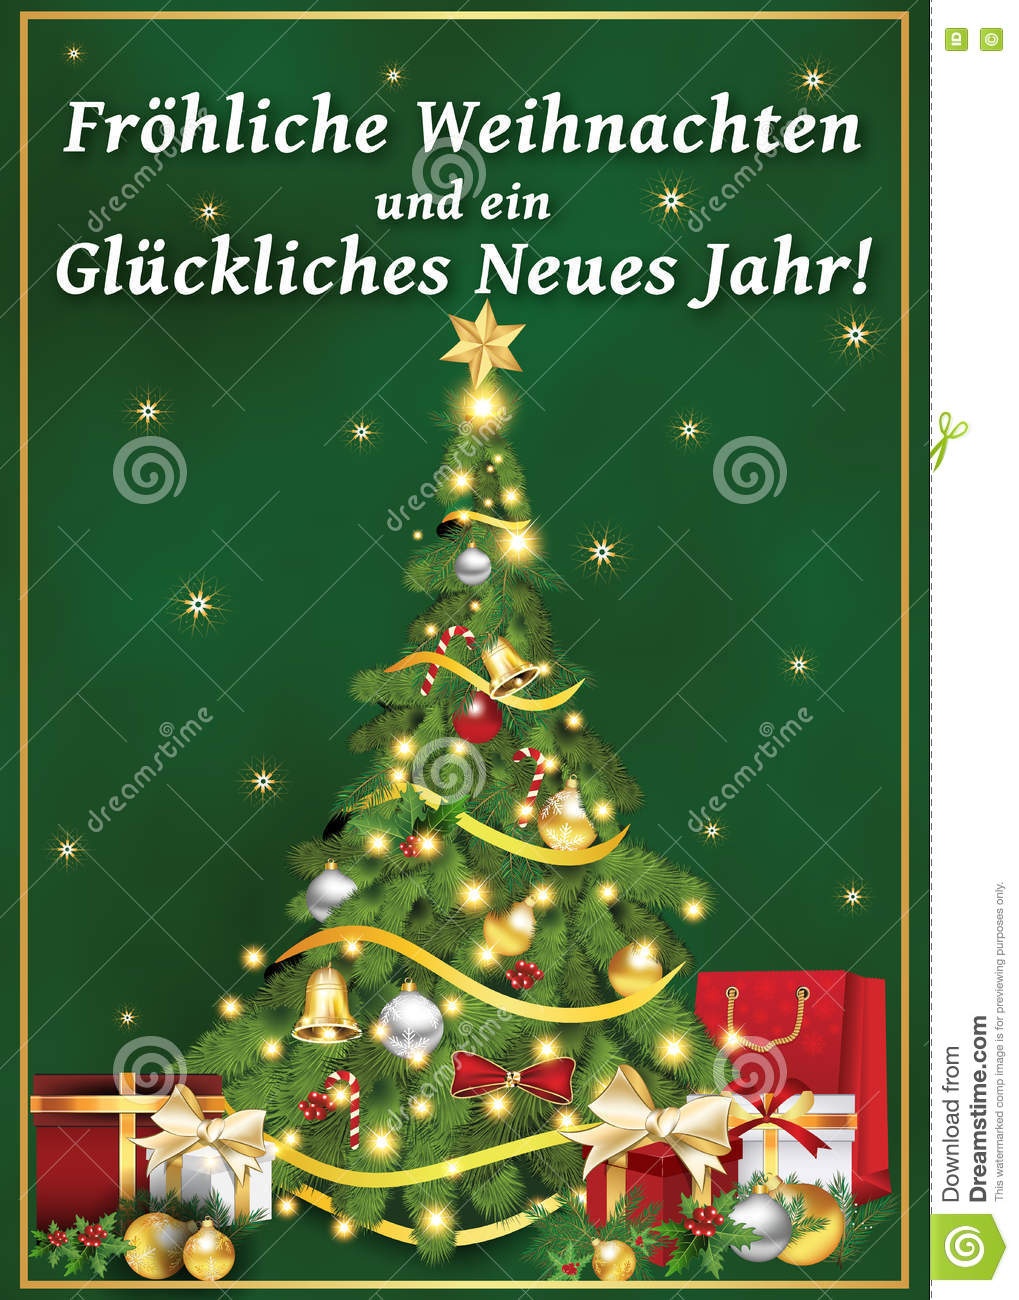 German Corporate Greeting Card For Winter Holiday. Stock - Free Printable German Christmas Cards